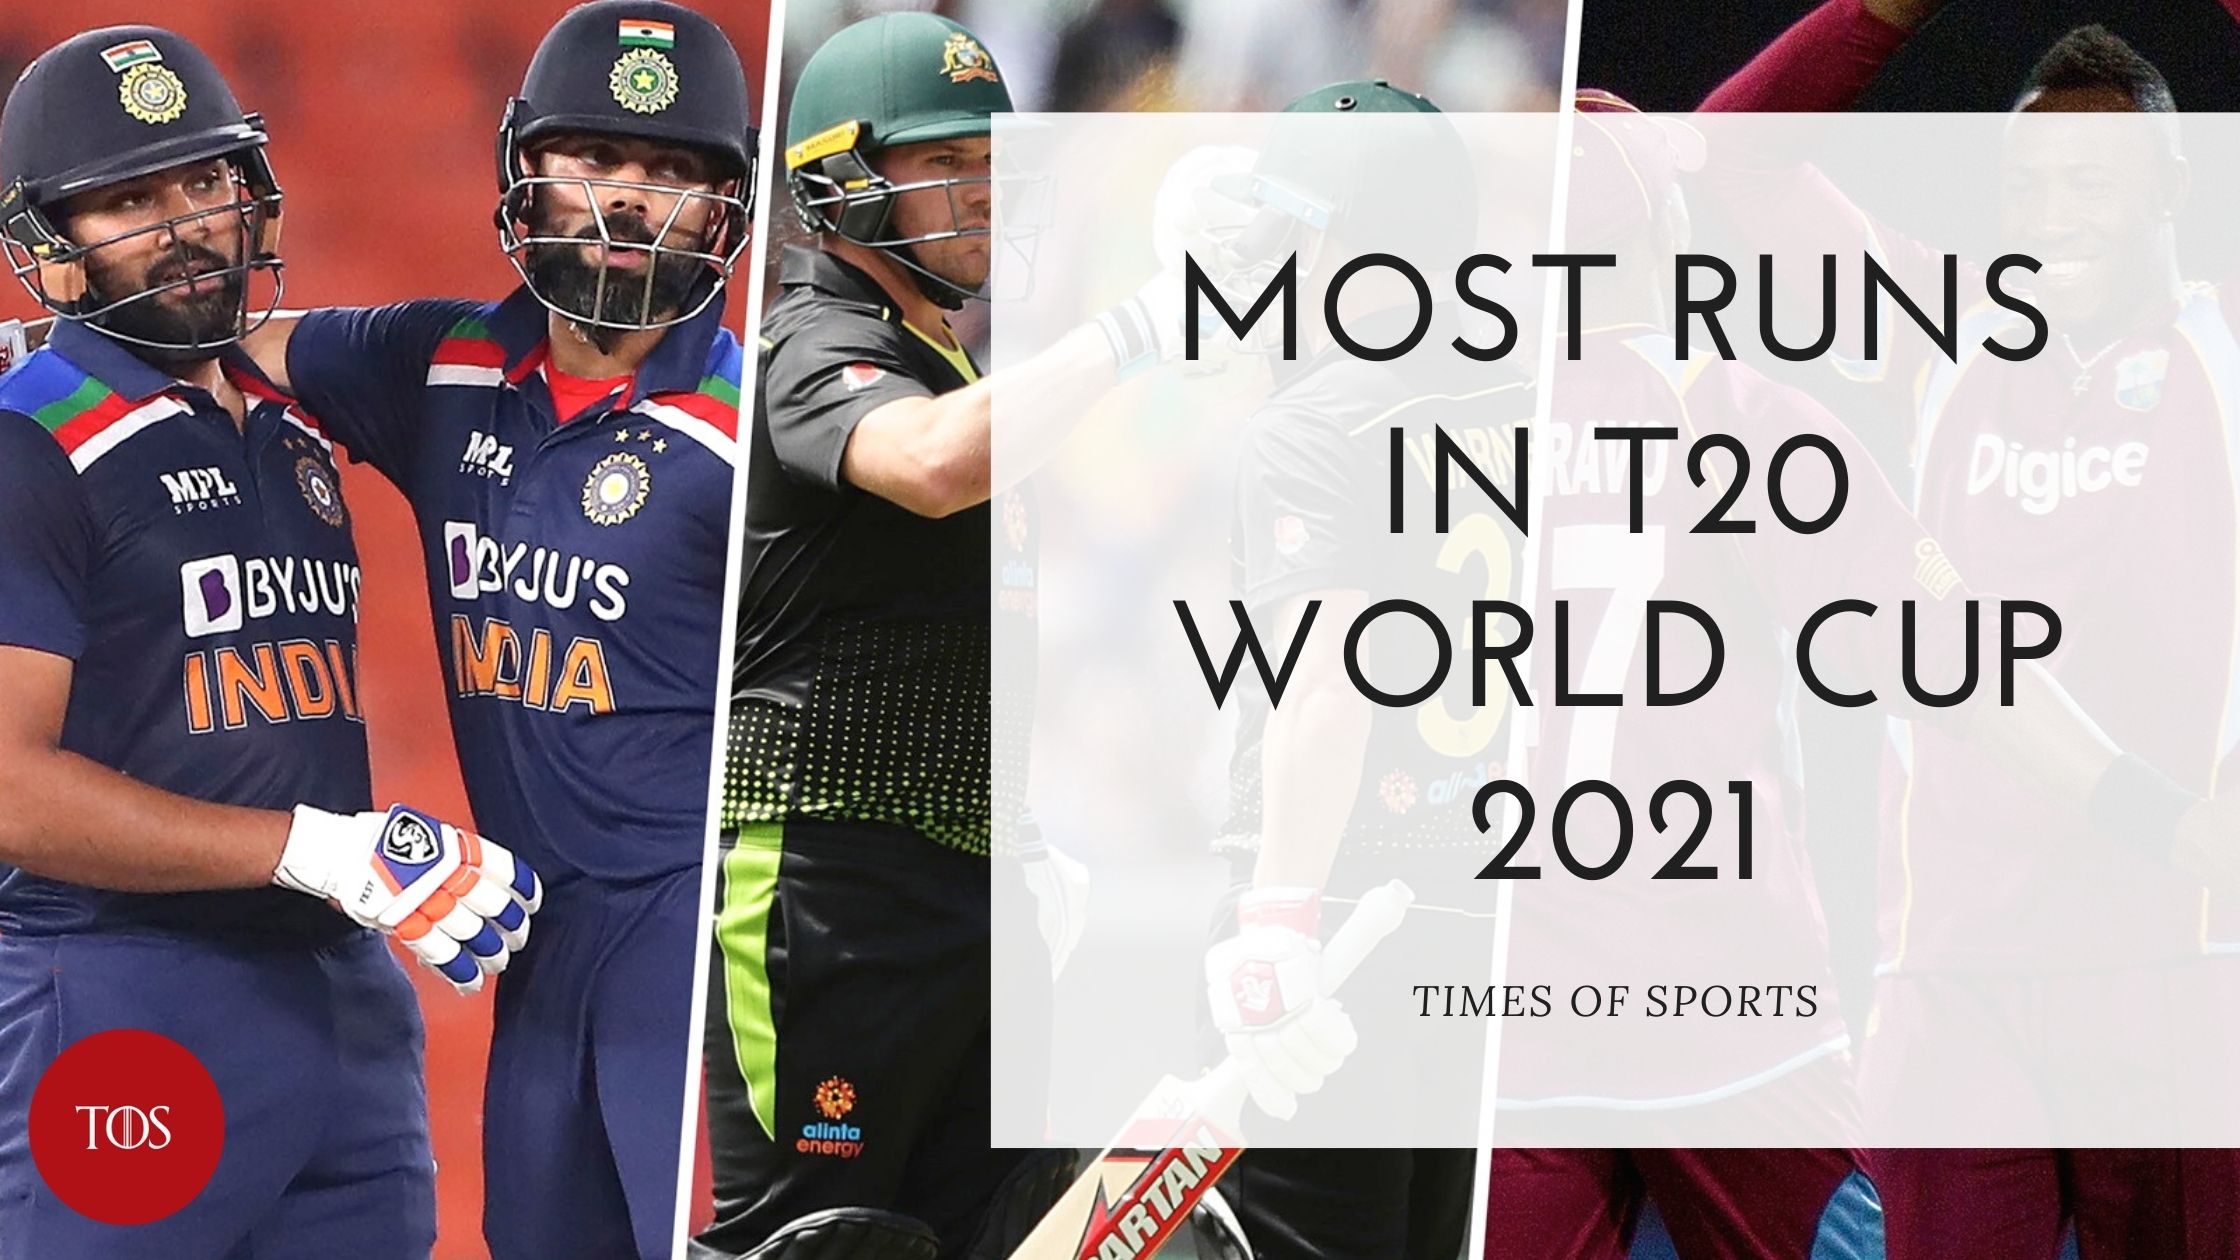 Most Runs in T20 World Cup 2021